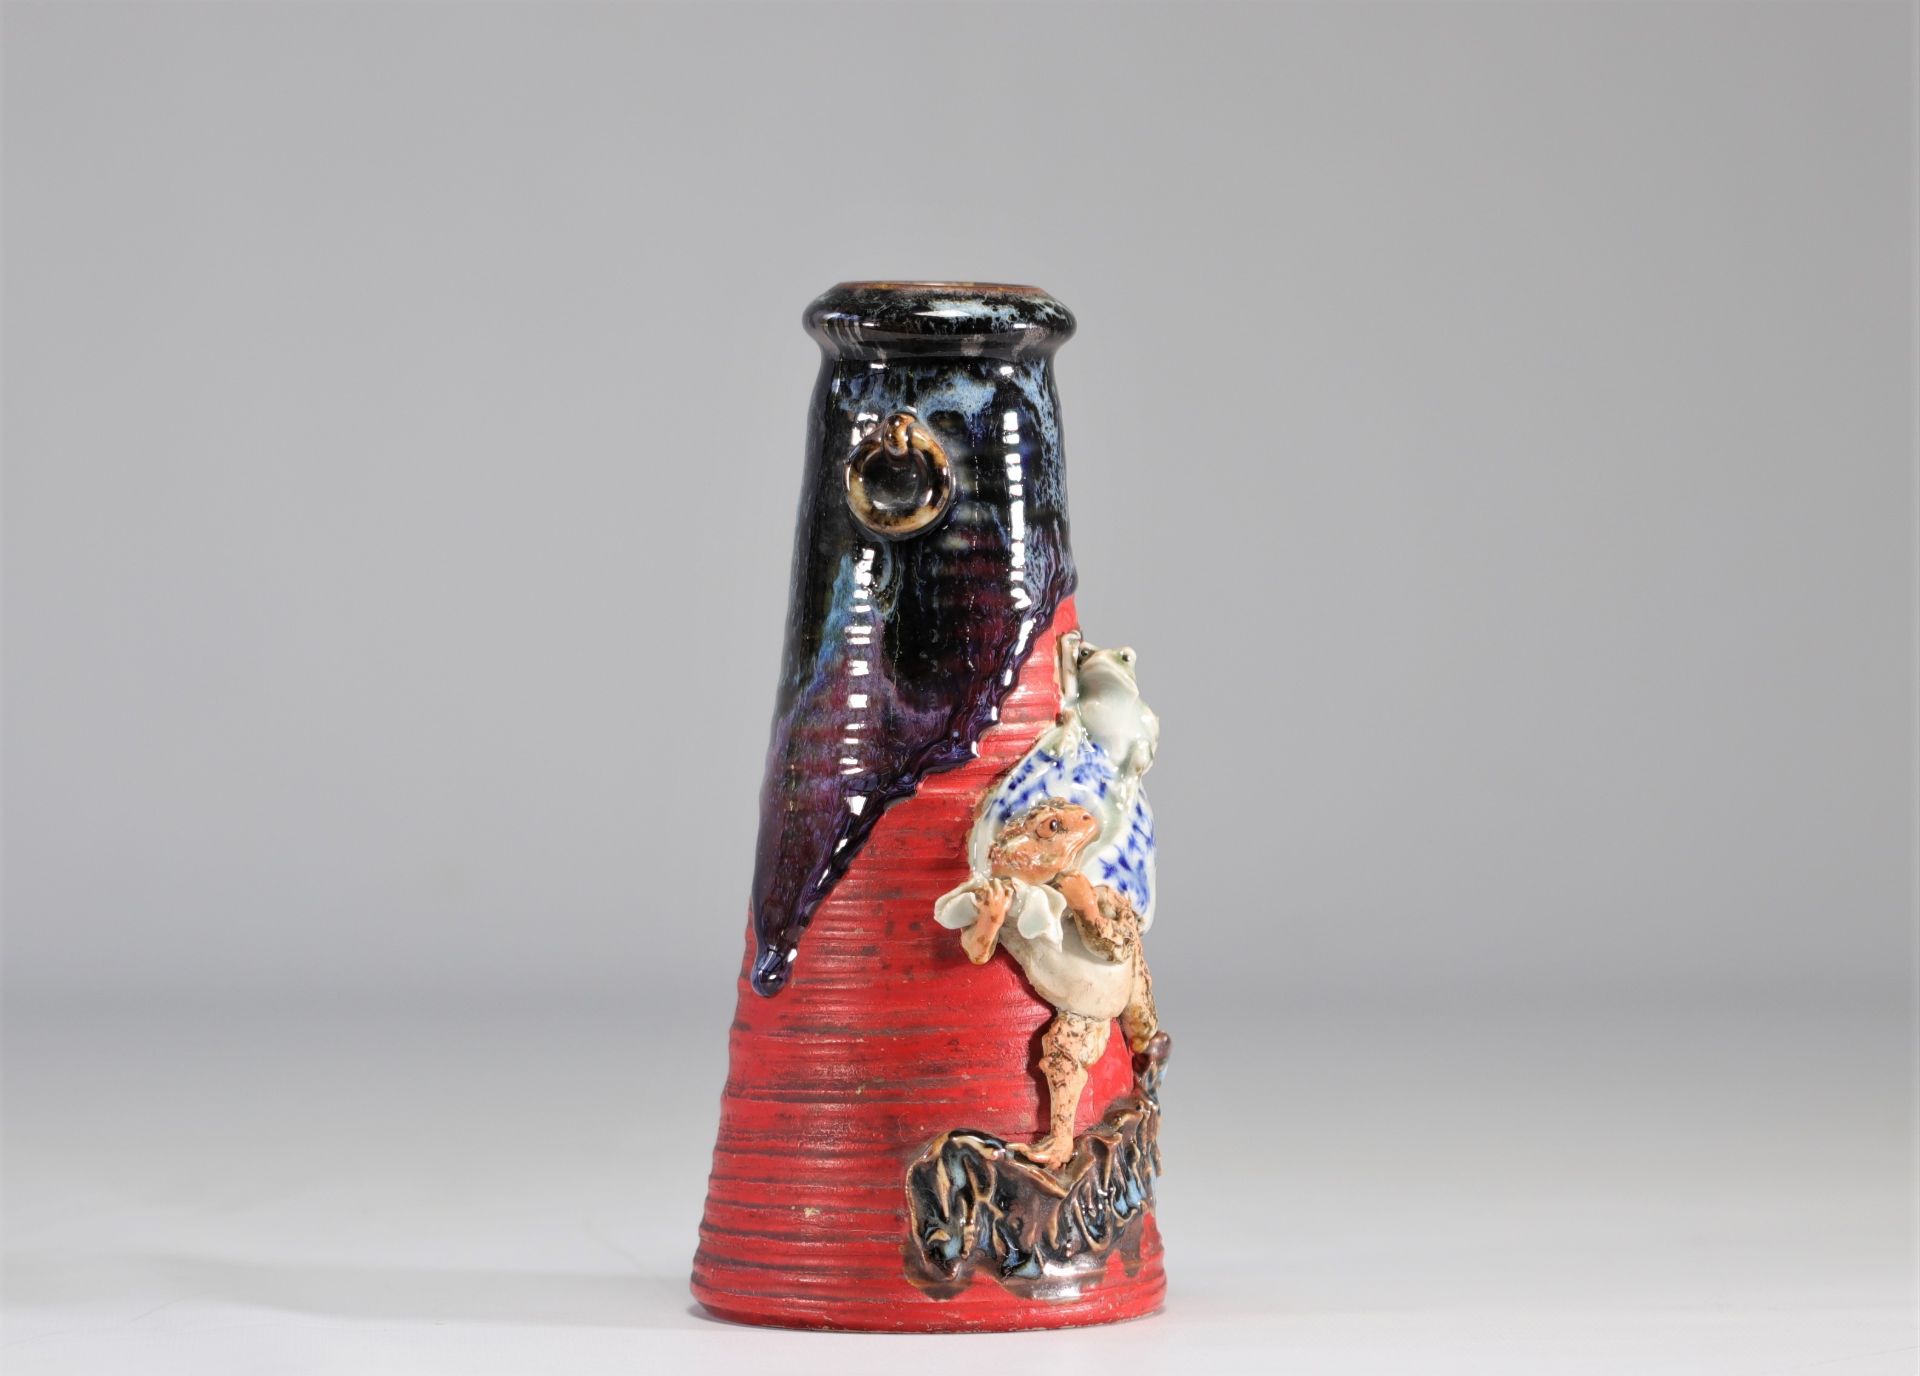 Sumida-Gawa ceramic vase decorated with toads from Japan from 19th century - Image 4 of 6